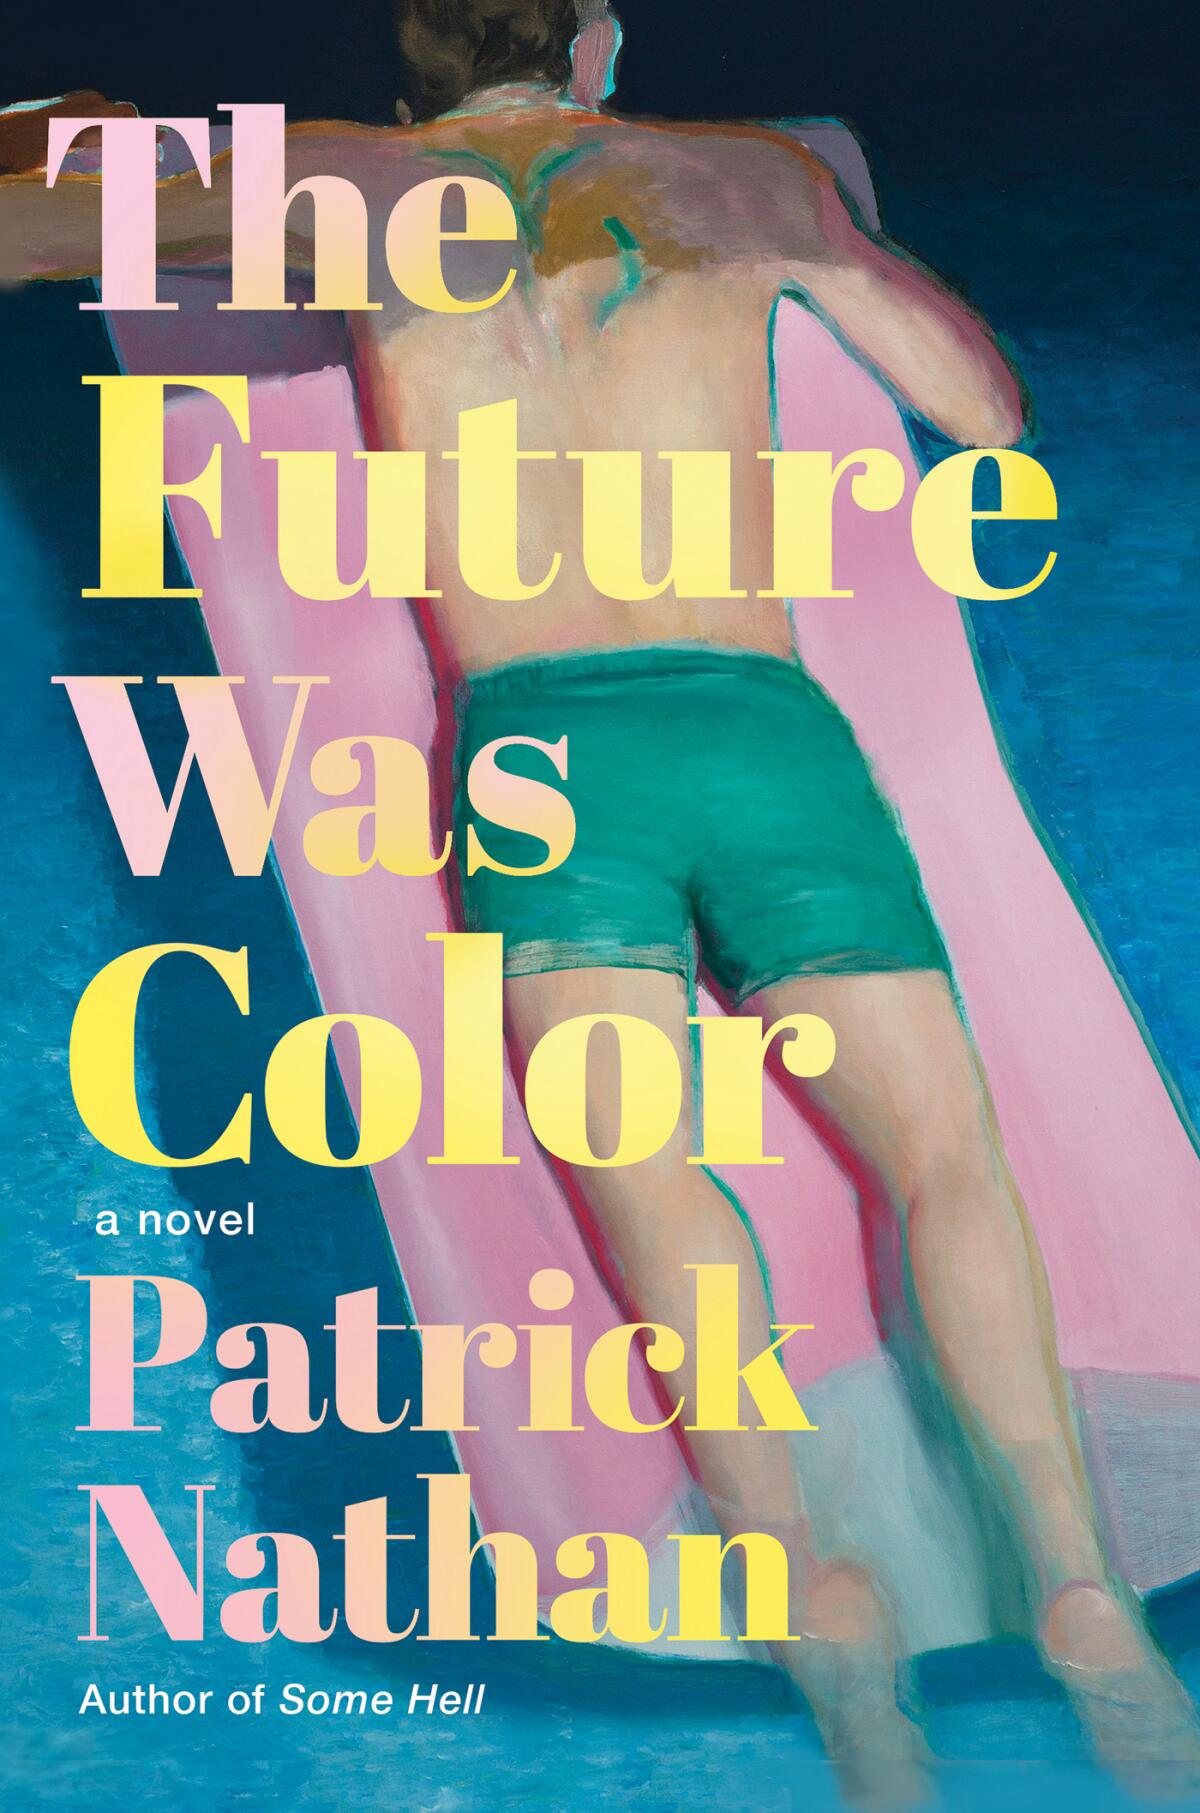 "The Future Was Color" by Patrick Nathan